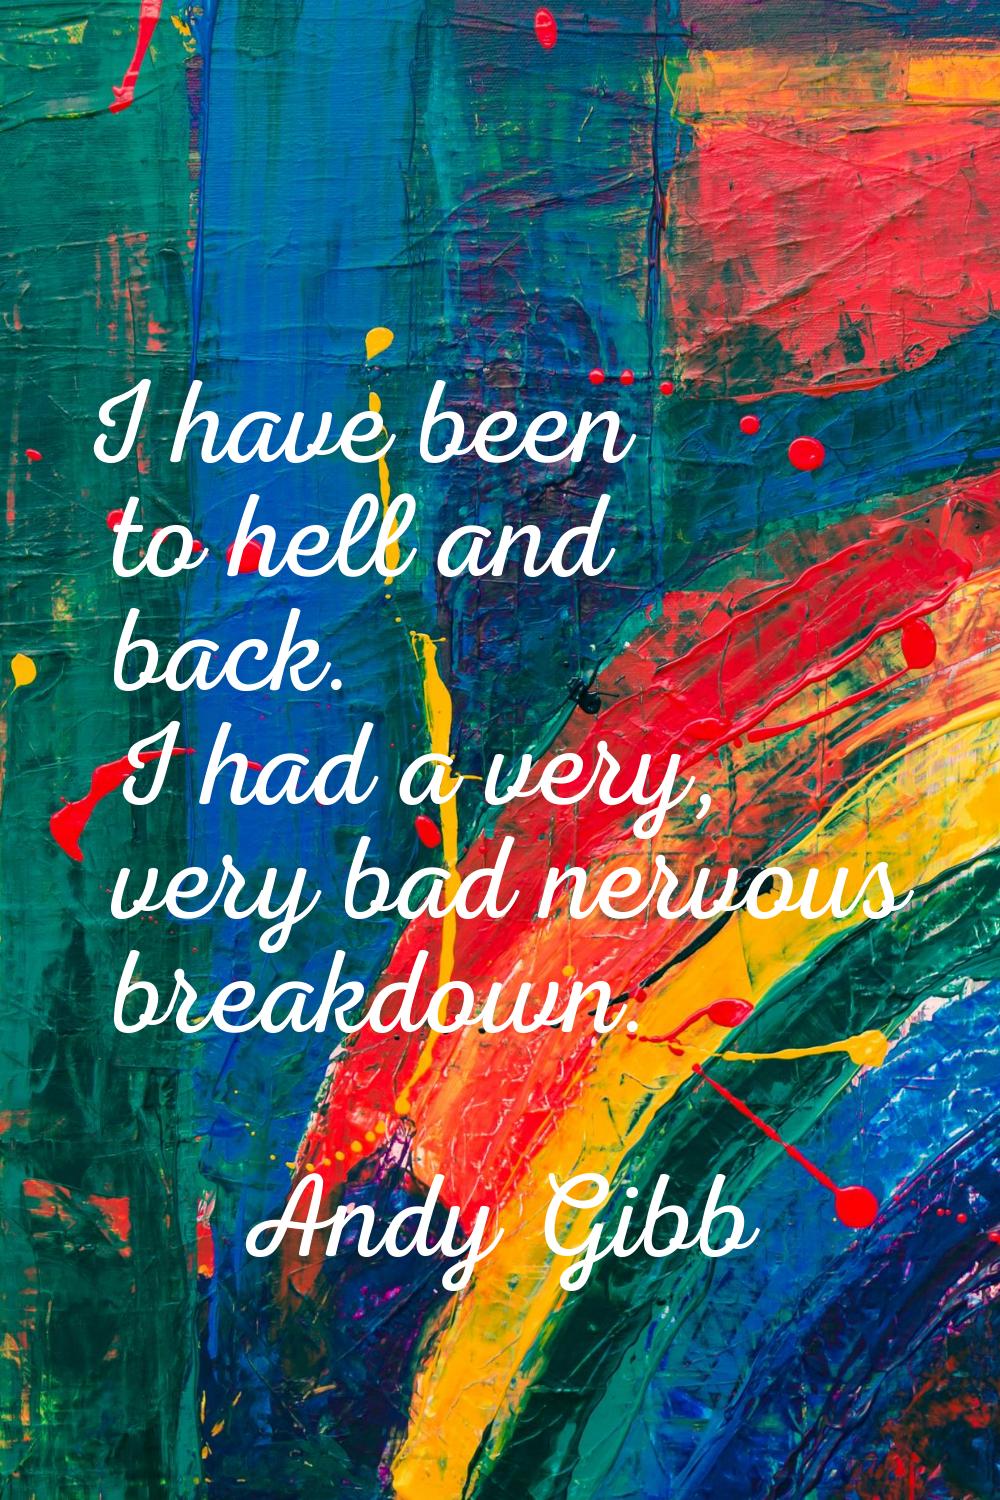 I have been to hell and back. I had a very, very bad nervous breakdown.